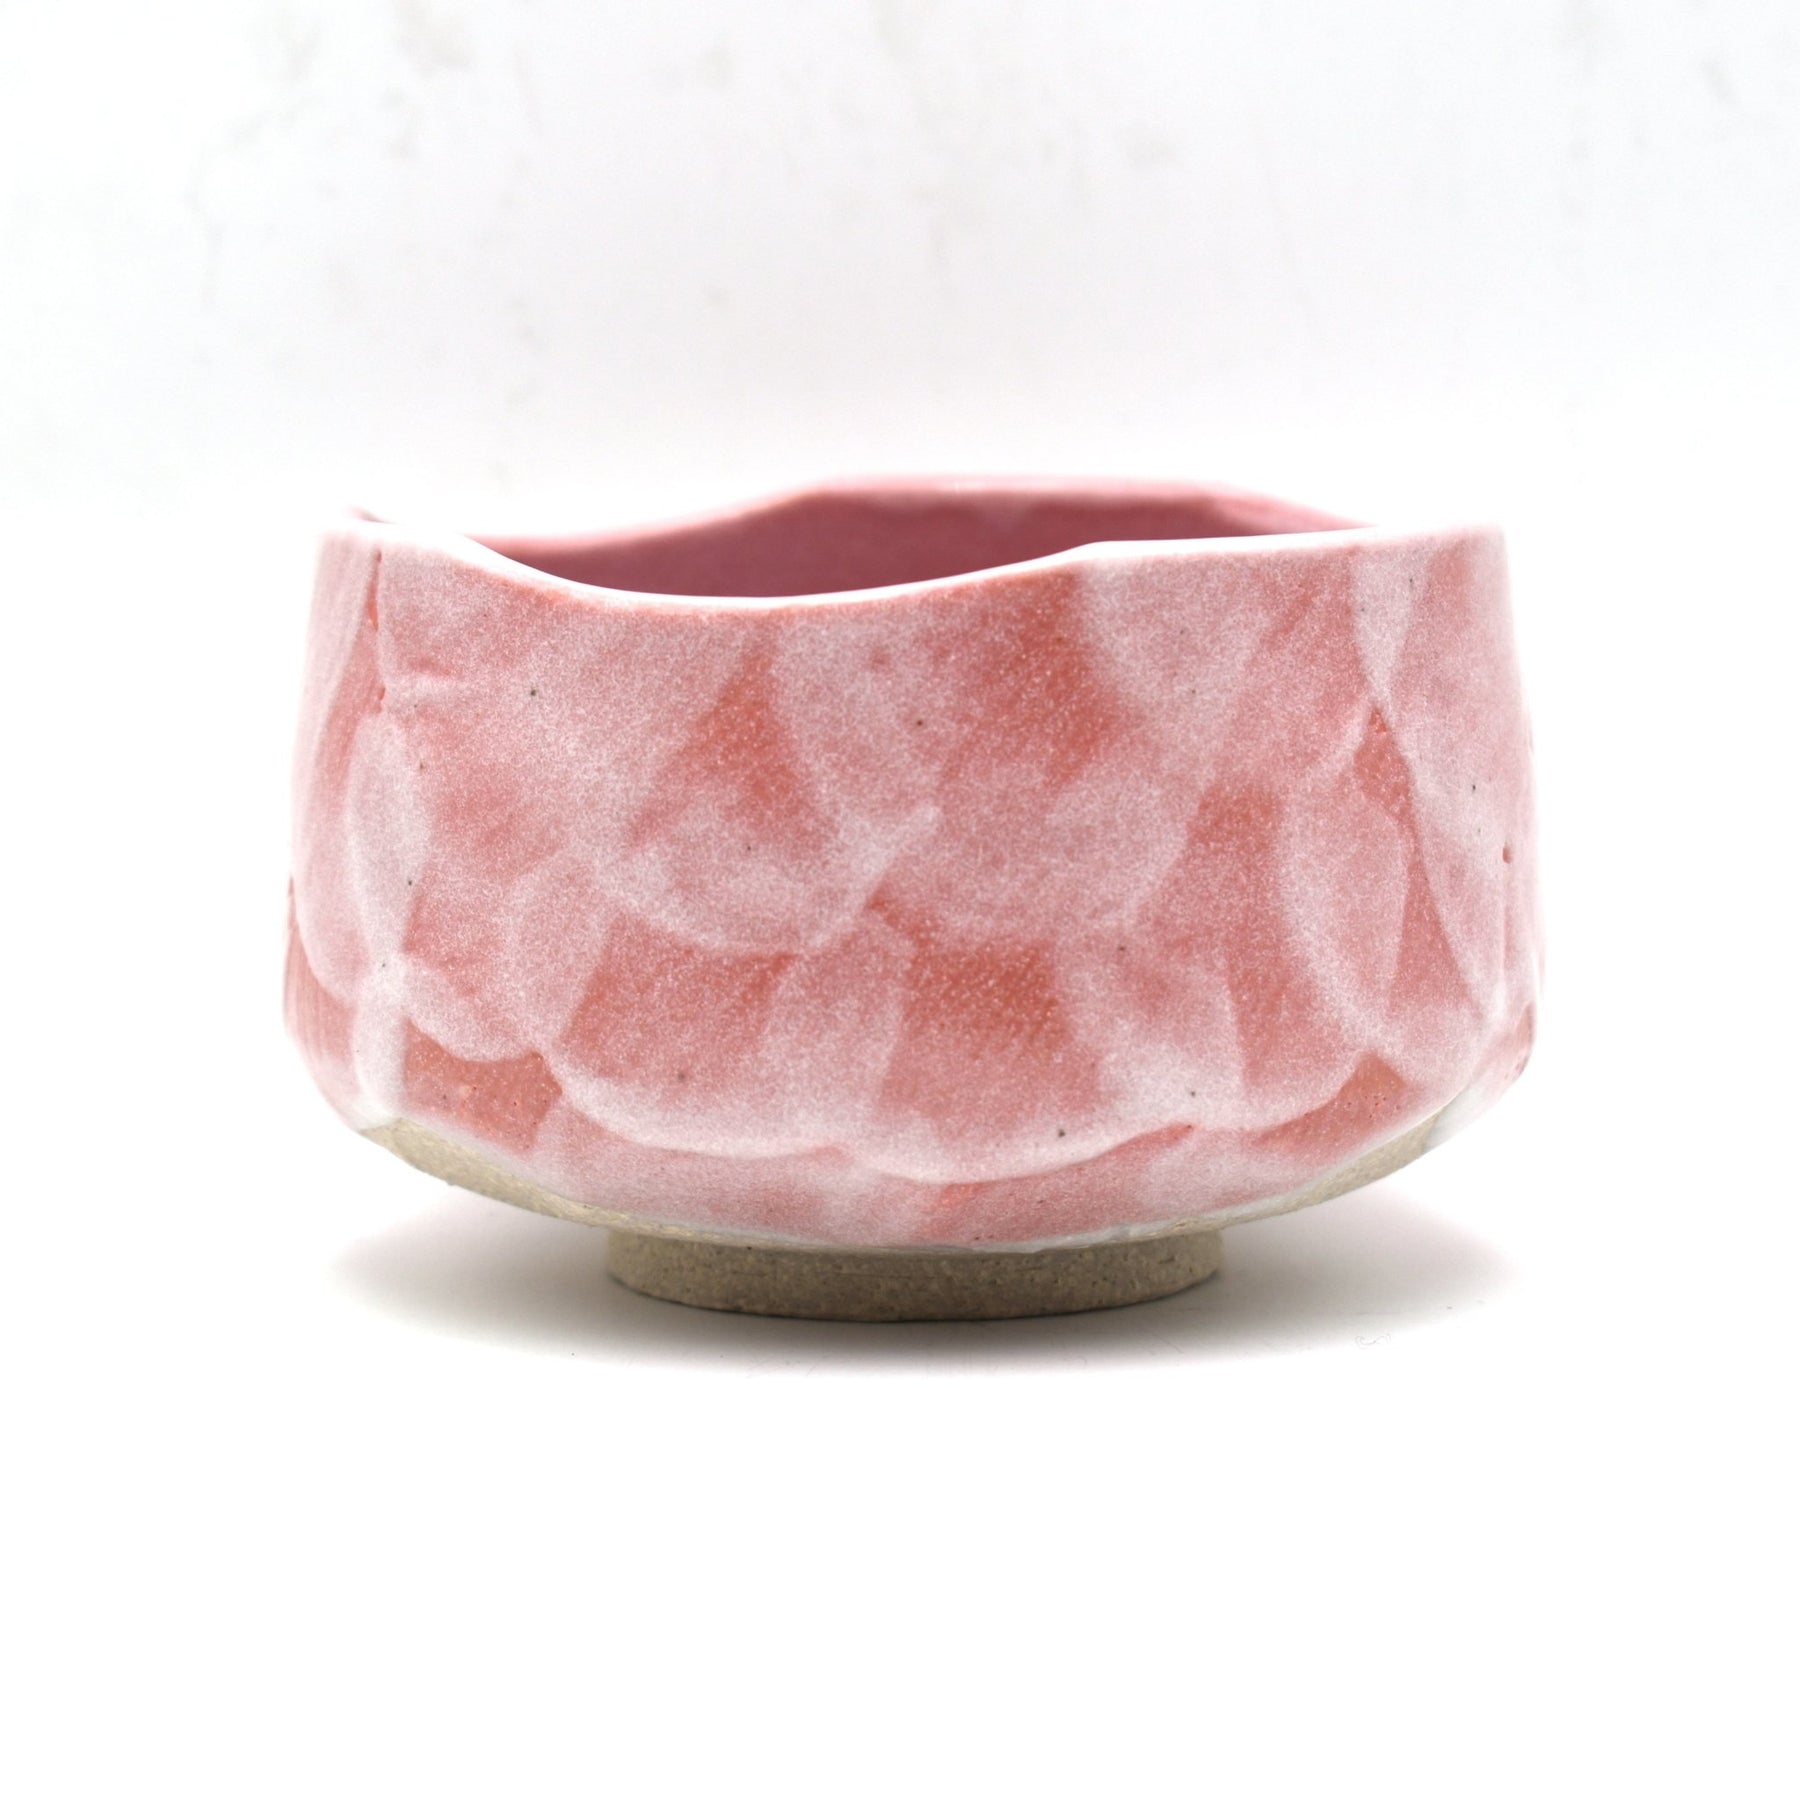 Ceramic Matcha Bowl, Speckled Light Pink, Bowl With Spout, Matcha